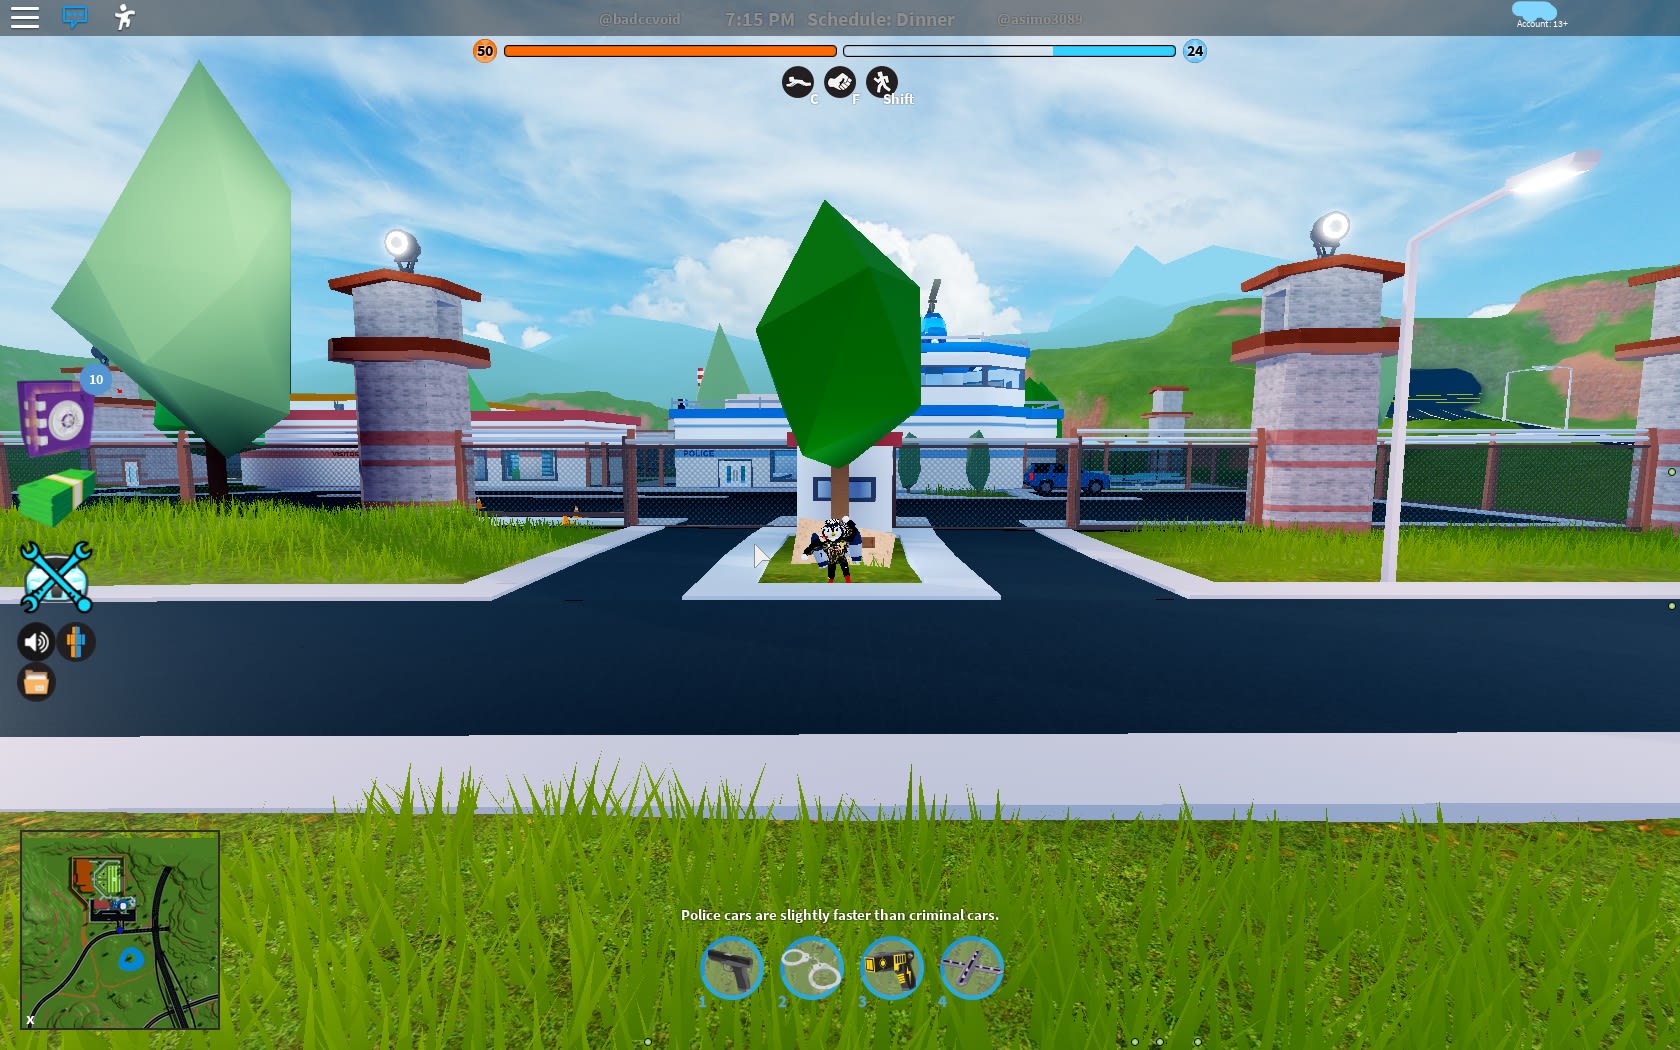 Teach You How To Be A Pro At Roblox Jailbreak Or Be Your Grinding Buddy By Progamingg - jailbreak roblox character jailbreak roblox background